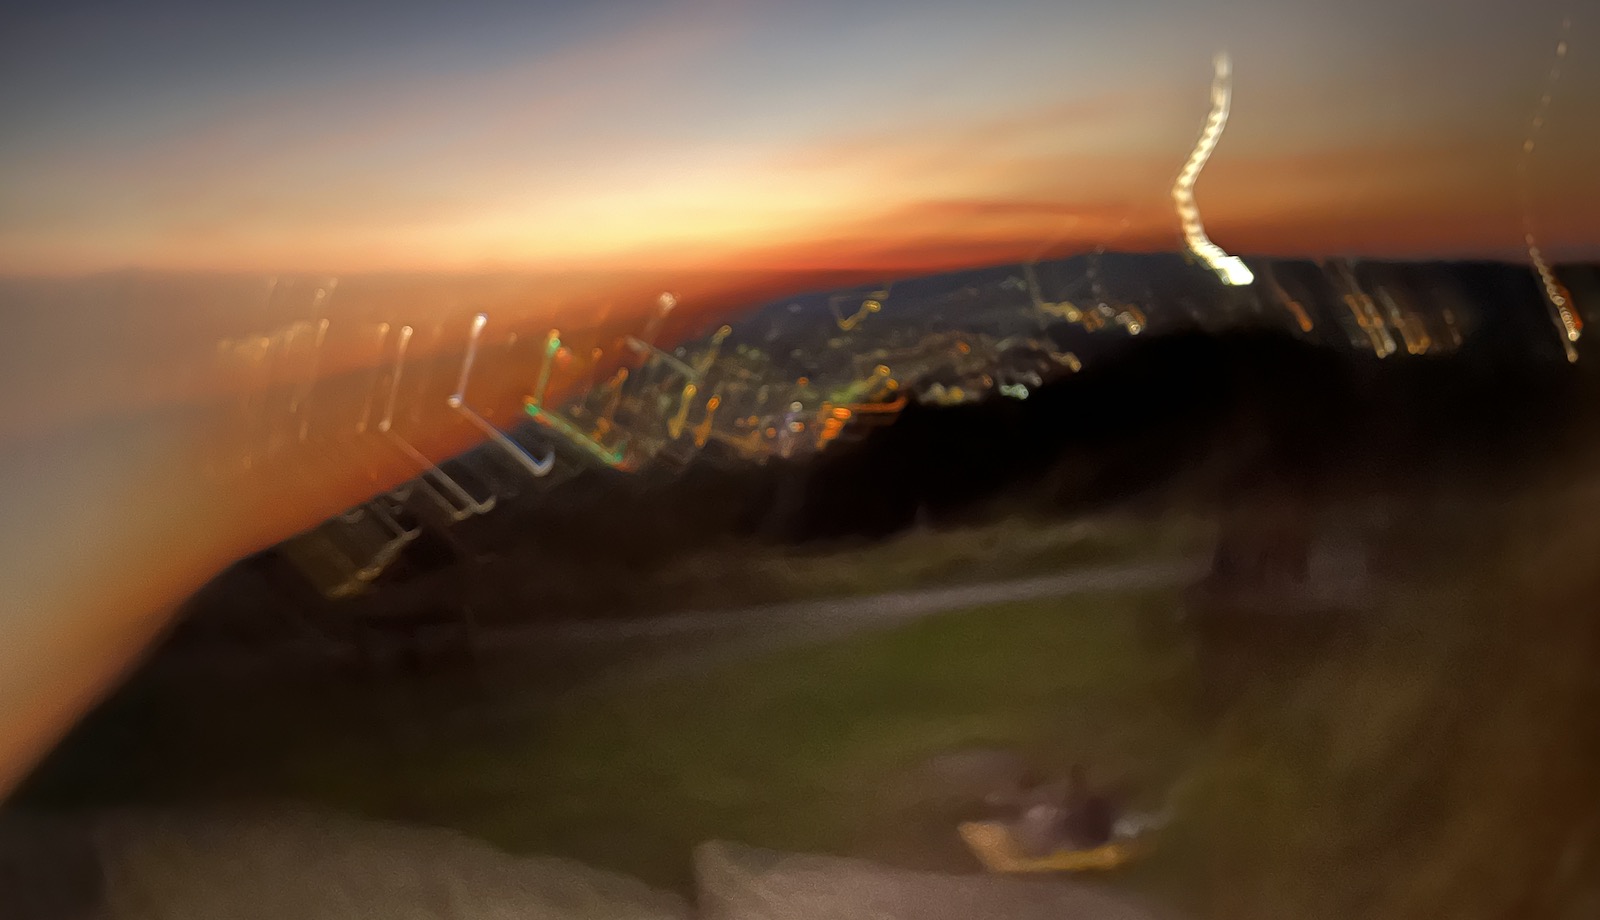 Blurred image of Stannington, Sheffield, photographed from Bole Hills.